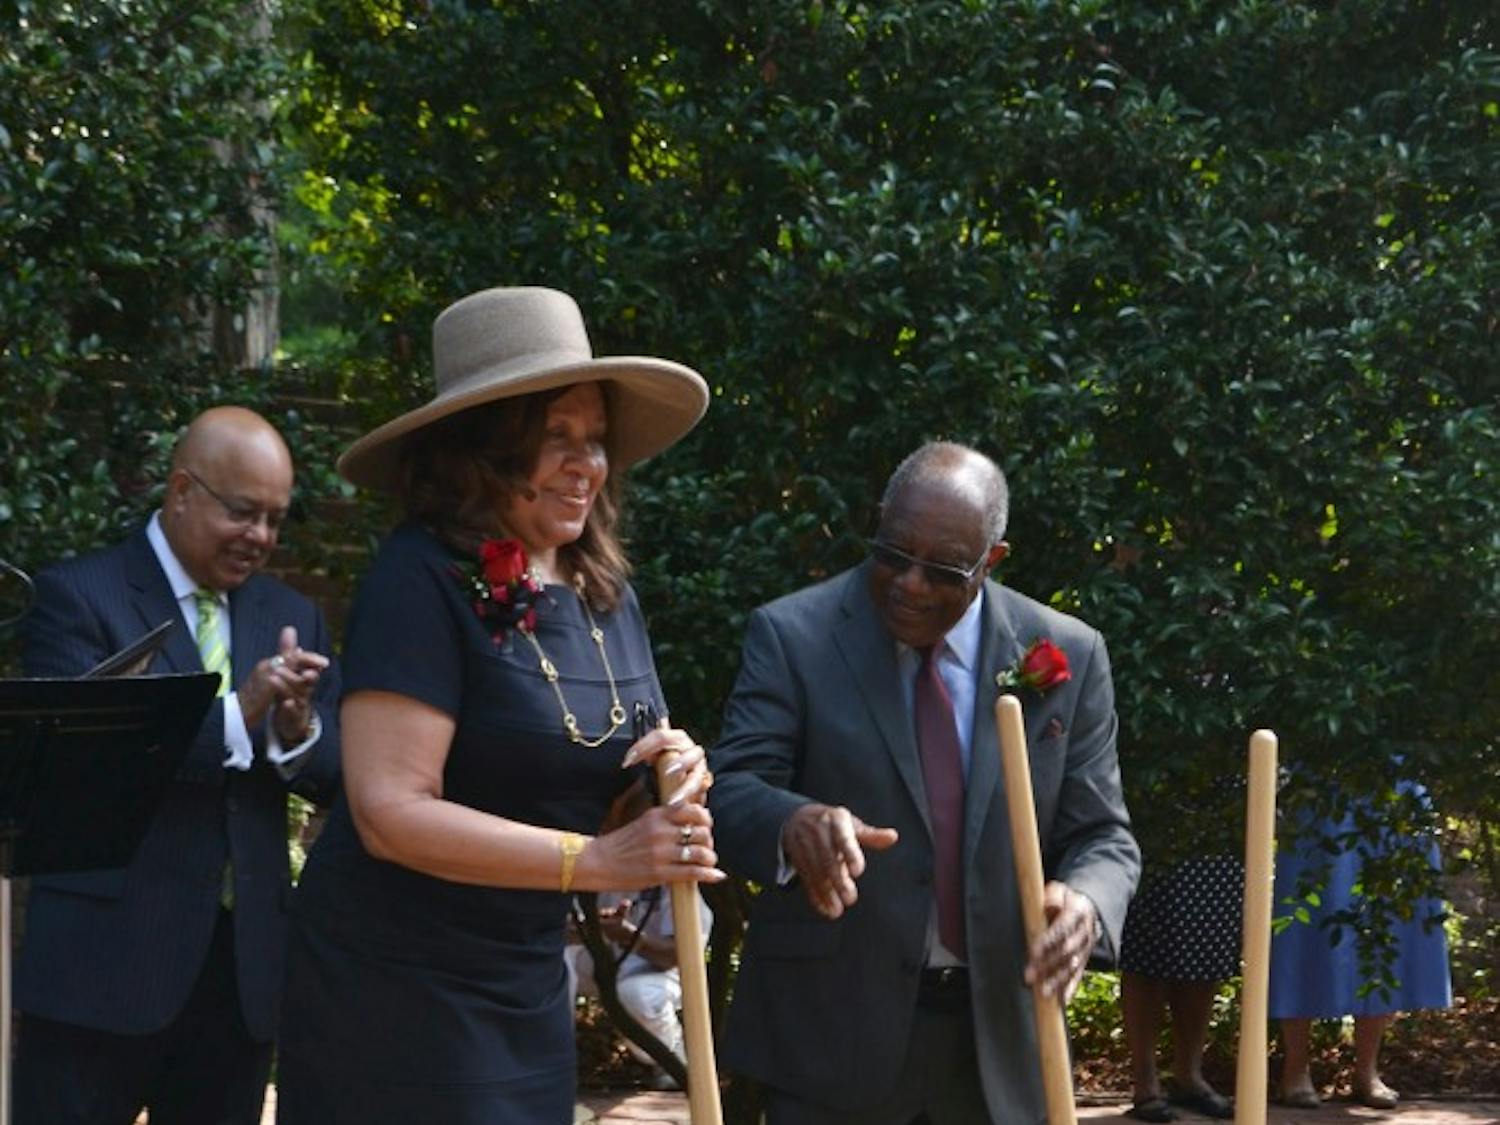 	Henrie Monteith Treadwell and James Solomon Jr. turn over the dirt at the site of the future desegregation reflection garden, leaving a shovel stationary in remembrance of Robert Anderson, who, with Treadwell and Solomon, desegregated the university in 1963.